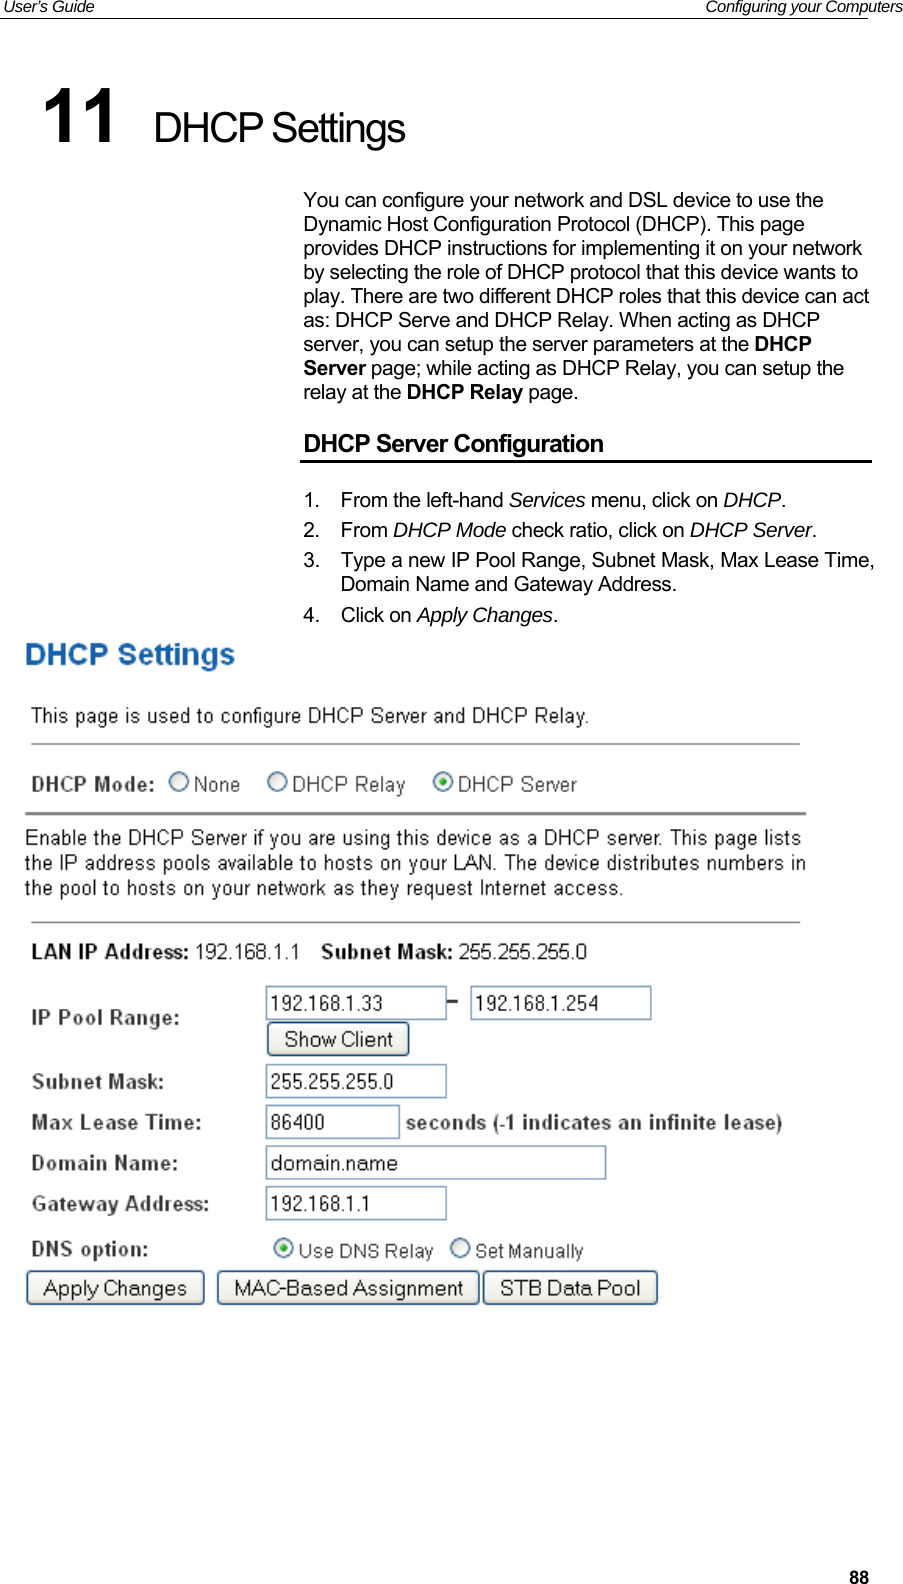 User’s Guide   Configuring your Computers  8811  DHCP Settings You can configure your network and DSL device to use the Dynamic Host Configuration Protocol (DHCP). This page provides DHCP instructions for implementing it on your network by selecting the role of DHCP protocol that this device wants to play. There are two different DHCP roles that this device can act as: DHCP Serve and DHCP Relay. When acting as DHCP server, you can setup the server parameters at the DHCP Server page; while acting as DHCP Relay, you can setup the relay at the DHCP Relay page. DHCP Server Configuration 1.  From the left-hand Services menu, click on DHCP. 2.  From DHCP Mode check ratio, click on DHCP Server. 3.  Type a new IP Pool Range, Subnet Mask, Max Lease Time, Domain Name and Gateway Address. 4.  Click on Apply Changes.       